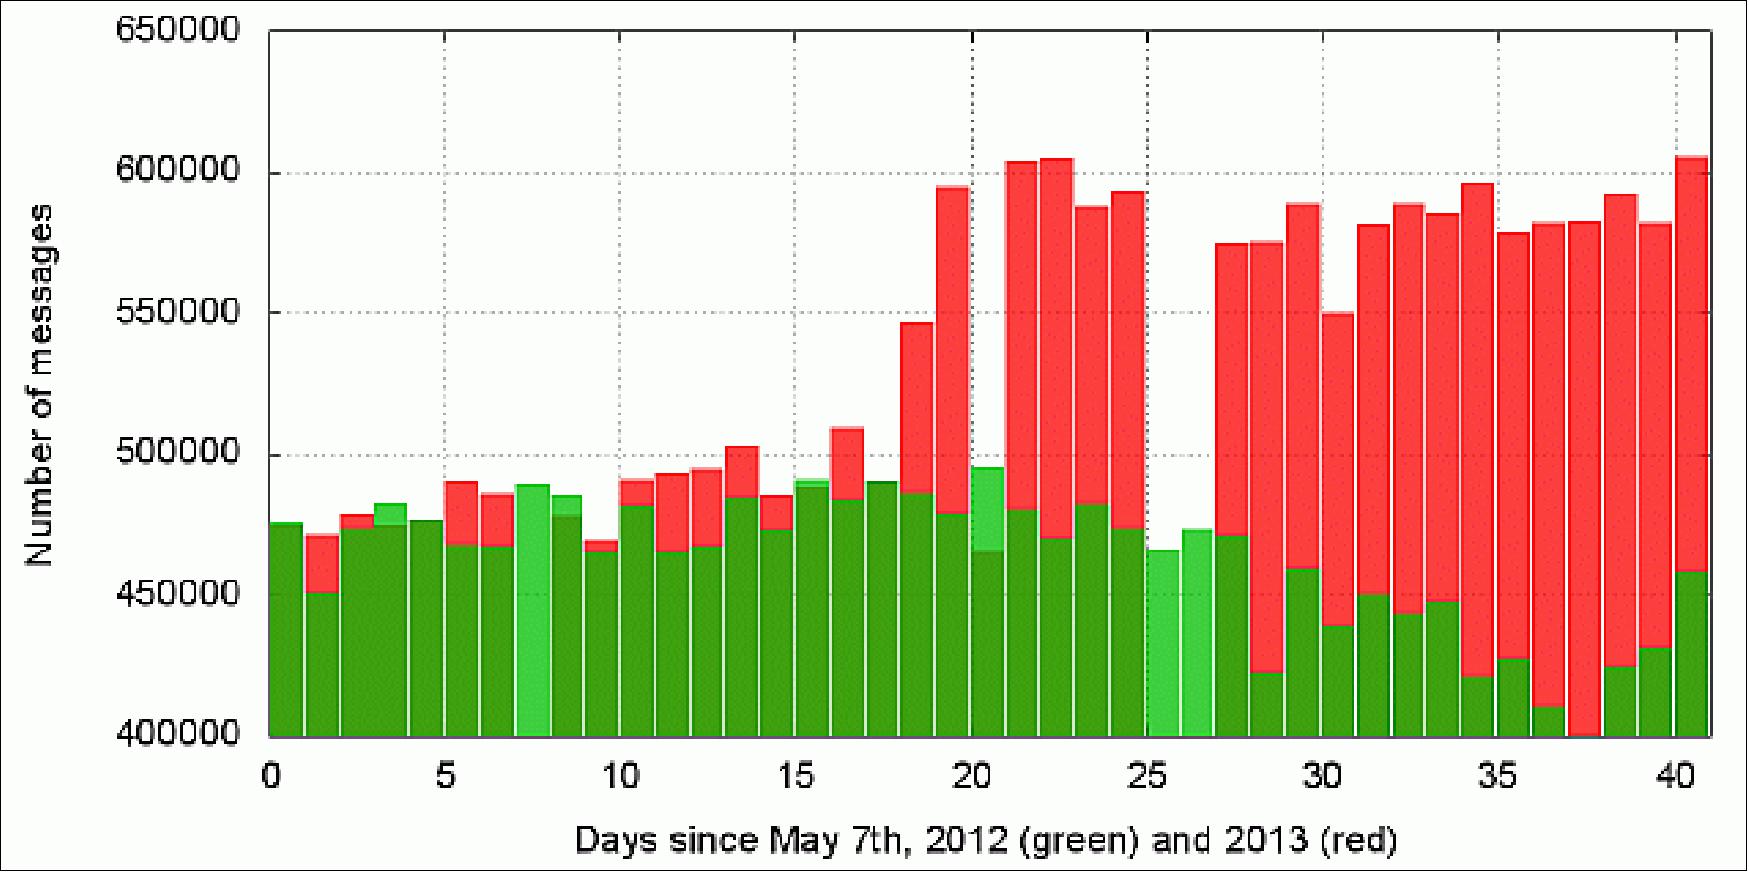 Figure 15: Number of messages received per day by AISSat-1 during 2012 and 2013 around the date of the upgrade. The drops on day 20, 25 and 26 in the numbers for 2013 were caused by satellite resets (image credit: FFI)